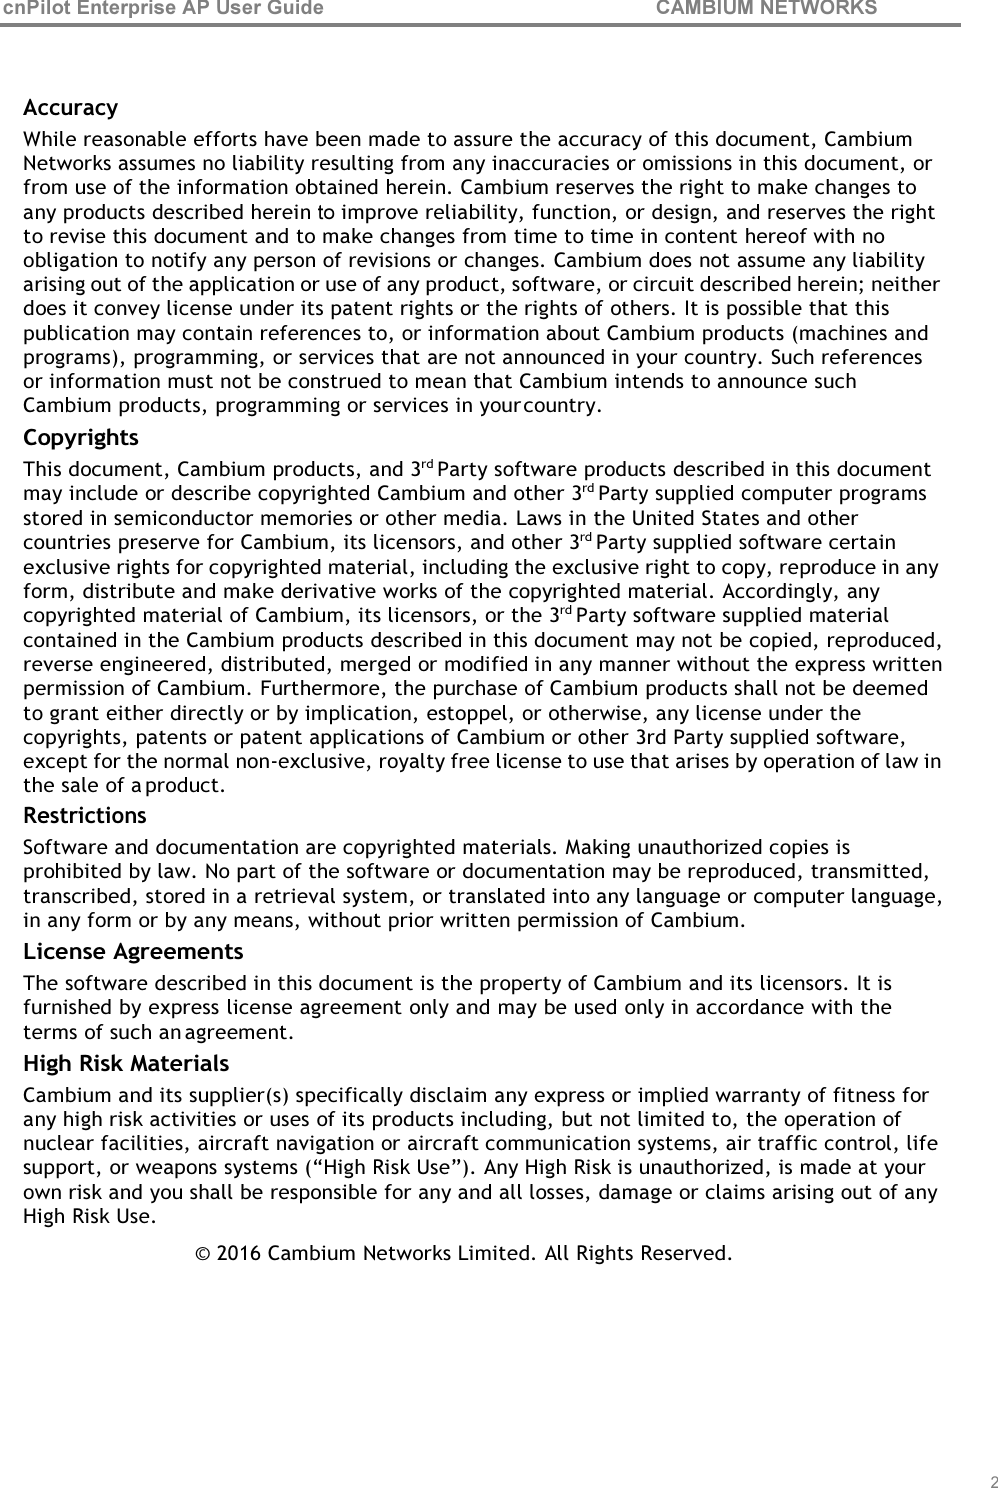 cnPilot Enterprise AP User Guide CAMBIUM NETWORKS    Accuracy While reasonable efforts have been made to assure the accuracy of this document, Cambium Networks assumes no liability resulting from any inaccuracies or omissions in this document, or from use of the information obtained herein. Cambium reserves the right to make changes to any products described herein to improve reliability, function, or design, and reserves the right to revise this document and to make changes from time to time in content hereof with no obligation to notify any person of revisions or changes. Cambium does not assume any liability arising out of the application or use of any product, software, or circuit described herein; neither does it convey license under its patent rights or the rights of others. It is possible that this publication may contain references to, or information about Cambium products (machines and programs), programming, or services that are not announced in your country. Such references or information must not be construed to mean that Cambium intends to announce such Cambium products, programming or services in your country. Copyrights This document, Cambium products, and 3rd Party software products described in this document may include or describe copyrighted Cambium and other 3rd Party supplied computer programs stored in semiconductor memories or other media. Laws in the United States and other countries preserve for Cambium, its licensors, and other 3rd Party supplied software certain exclusive rights for copyrighted material, including the exclusive right to copy, reproduce in any form, distribute and make derivative works of the copyrighted material. Accordingly, any copyrighted material of Cambium, its licensors, or the 3rd Party software supplied material contained in the Cambium products described in this document may not be copied, reproduced, reverse engineered, distributed, merged or modified in any manner without the express written permission of Cambium. Furthermore, the purchase of Cambium products shall not be deemed to grant either directly or by implication, estoppel, or otherwise, any license under the copyrights, patents or patent applications of Cambium or other 3rd Party supplied software, except for the normal non-exclusive, royalty free license to use that arises by operation of law in the sale of a product. Restrictions Software and documentation are copyrighted materials. Making unauthorized copies is prohibited by law. No part of the software or documentation may be reproduced, transmitted, transcribed, stored in a retrieval system, or translated into any language or computer language, in any form or by any means, without prior written permission of Cambium. License Agreements The software described in this document is the property of Cambium and its licensors. It is furnished by express license agreement only and may be used only in accordance with the terms of such an agreement. High Risk Materials Cambium and its supplier(s) specifically disclaim any express or implied warranty of fitness for any high risk activities or uses of its products including, but not limited to, the operation of nuclear facilities, aircraft navigation or aircraft communication systems, air traffic control, life support, or weapons systems (“High Risk Use”). Any High Risk is unauthorized, is made at your own risk and you shall be responsible for any and all losses, damage or claims arising out of any High Risk Use. © 2016 Cambium Networks Limited. All Rights Reserved.         2 